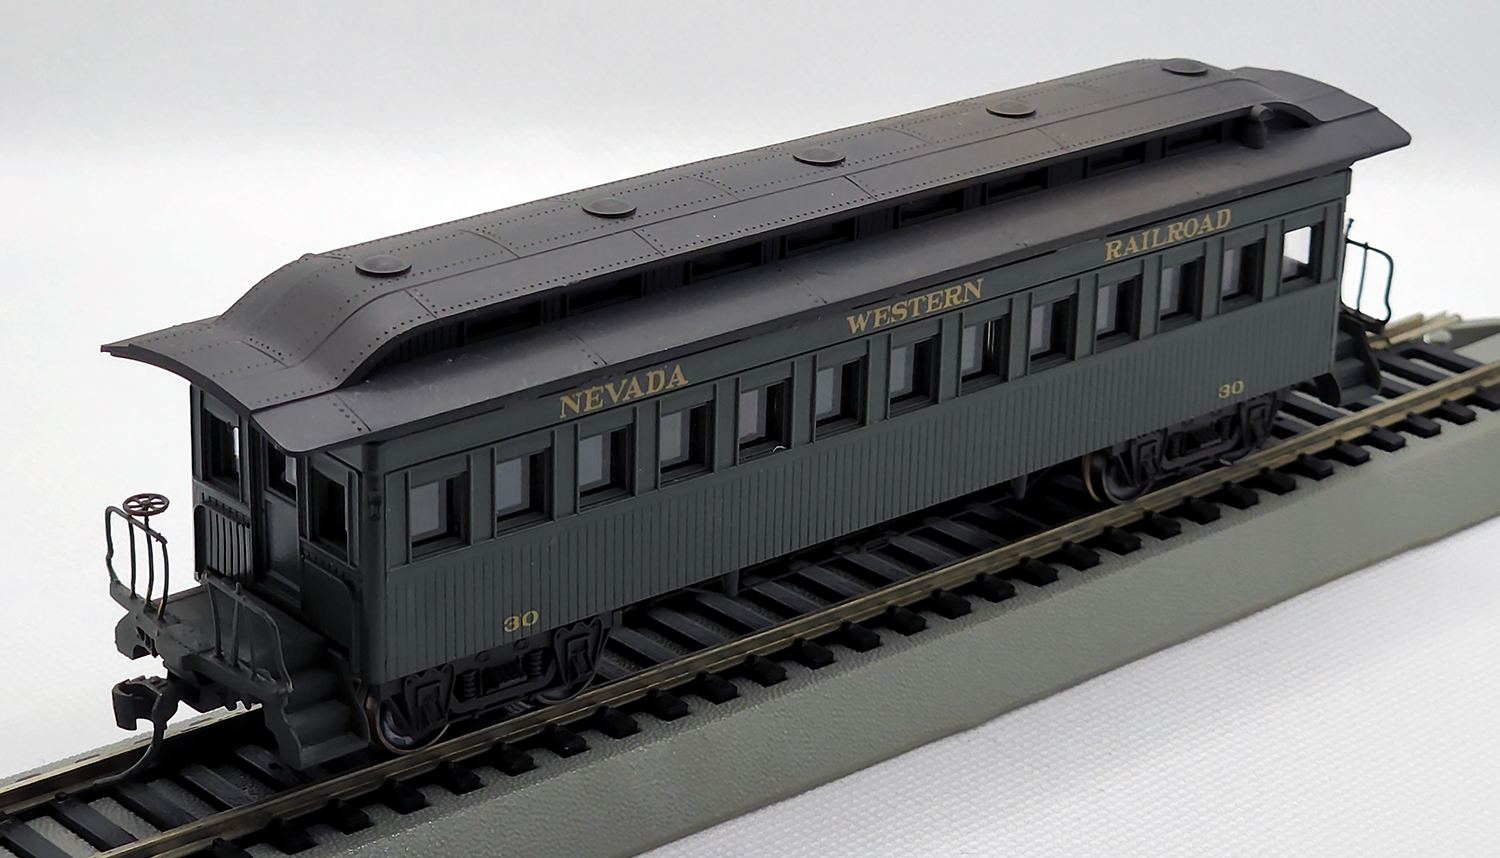 7th view of the Unbranded Nevada Western Railroad Passenger Coach #30 in my HO-scale Collection